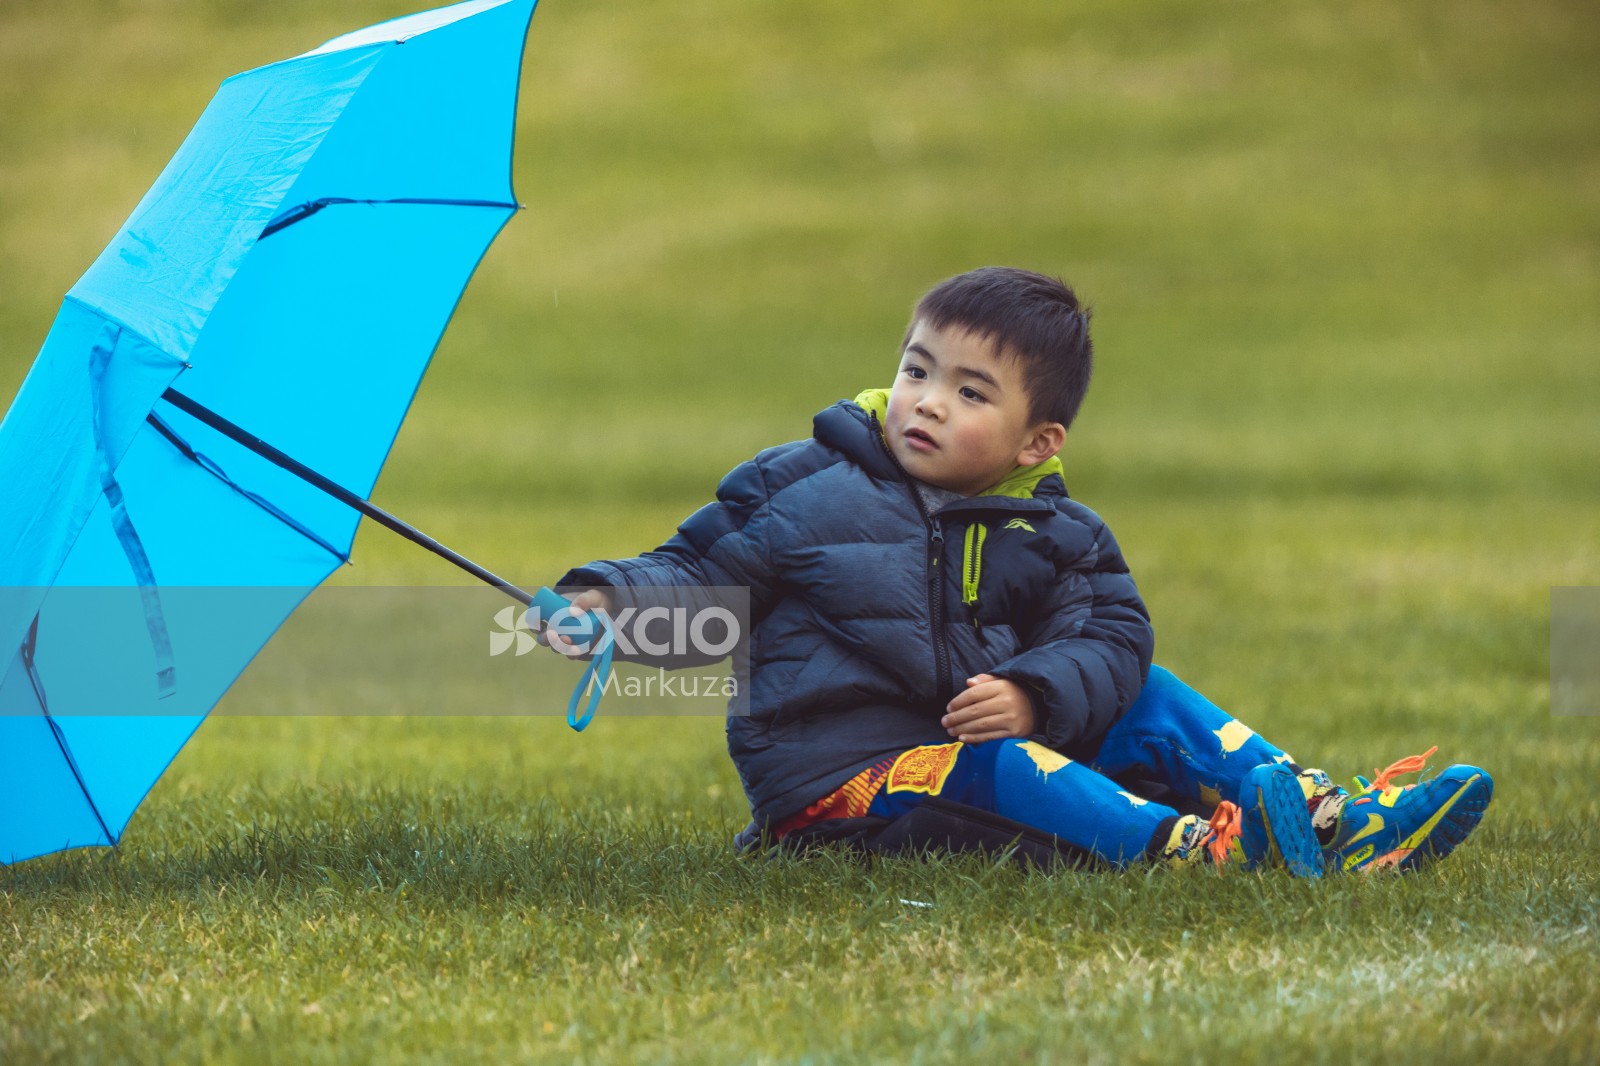 Boy with a blue umbrella sitting on grass at Little Dribblers soccer contest